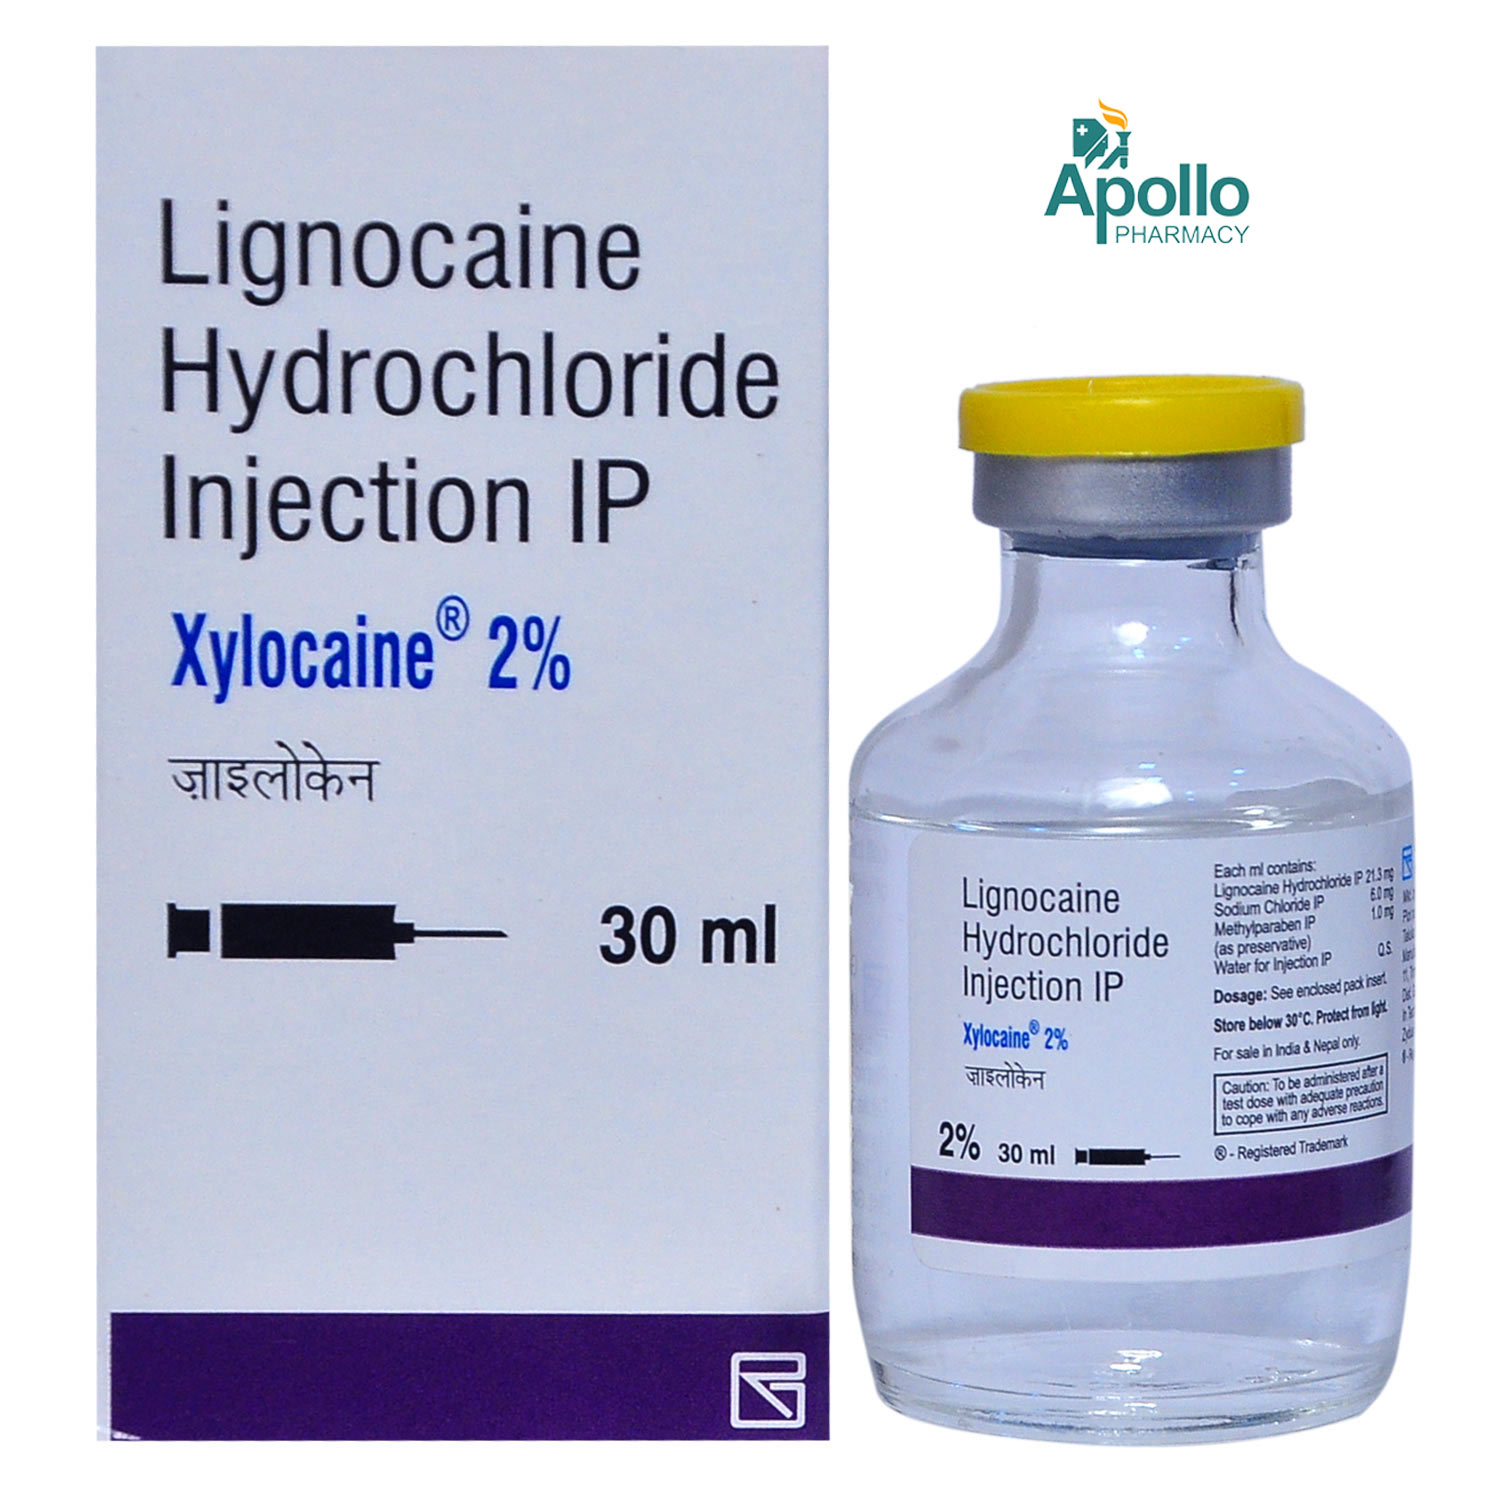 XYLOCAINE 2% IM INJECTION 30ML, Pack of 1 INJECTION